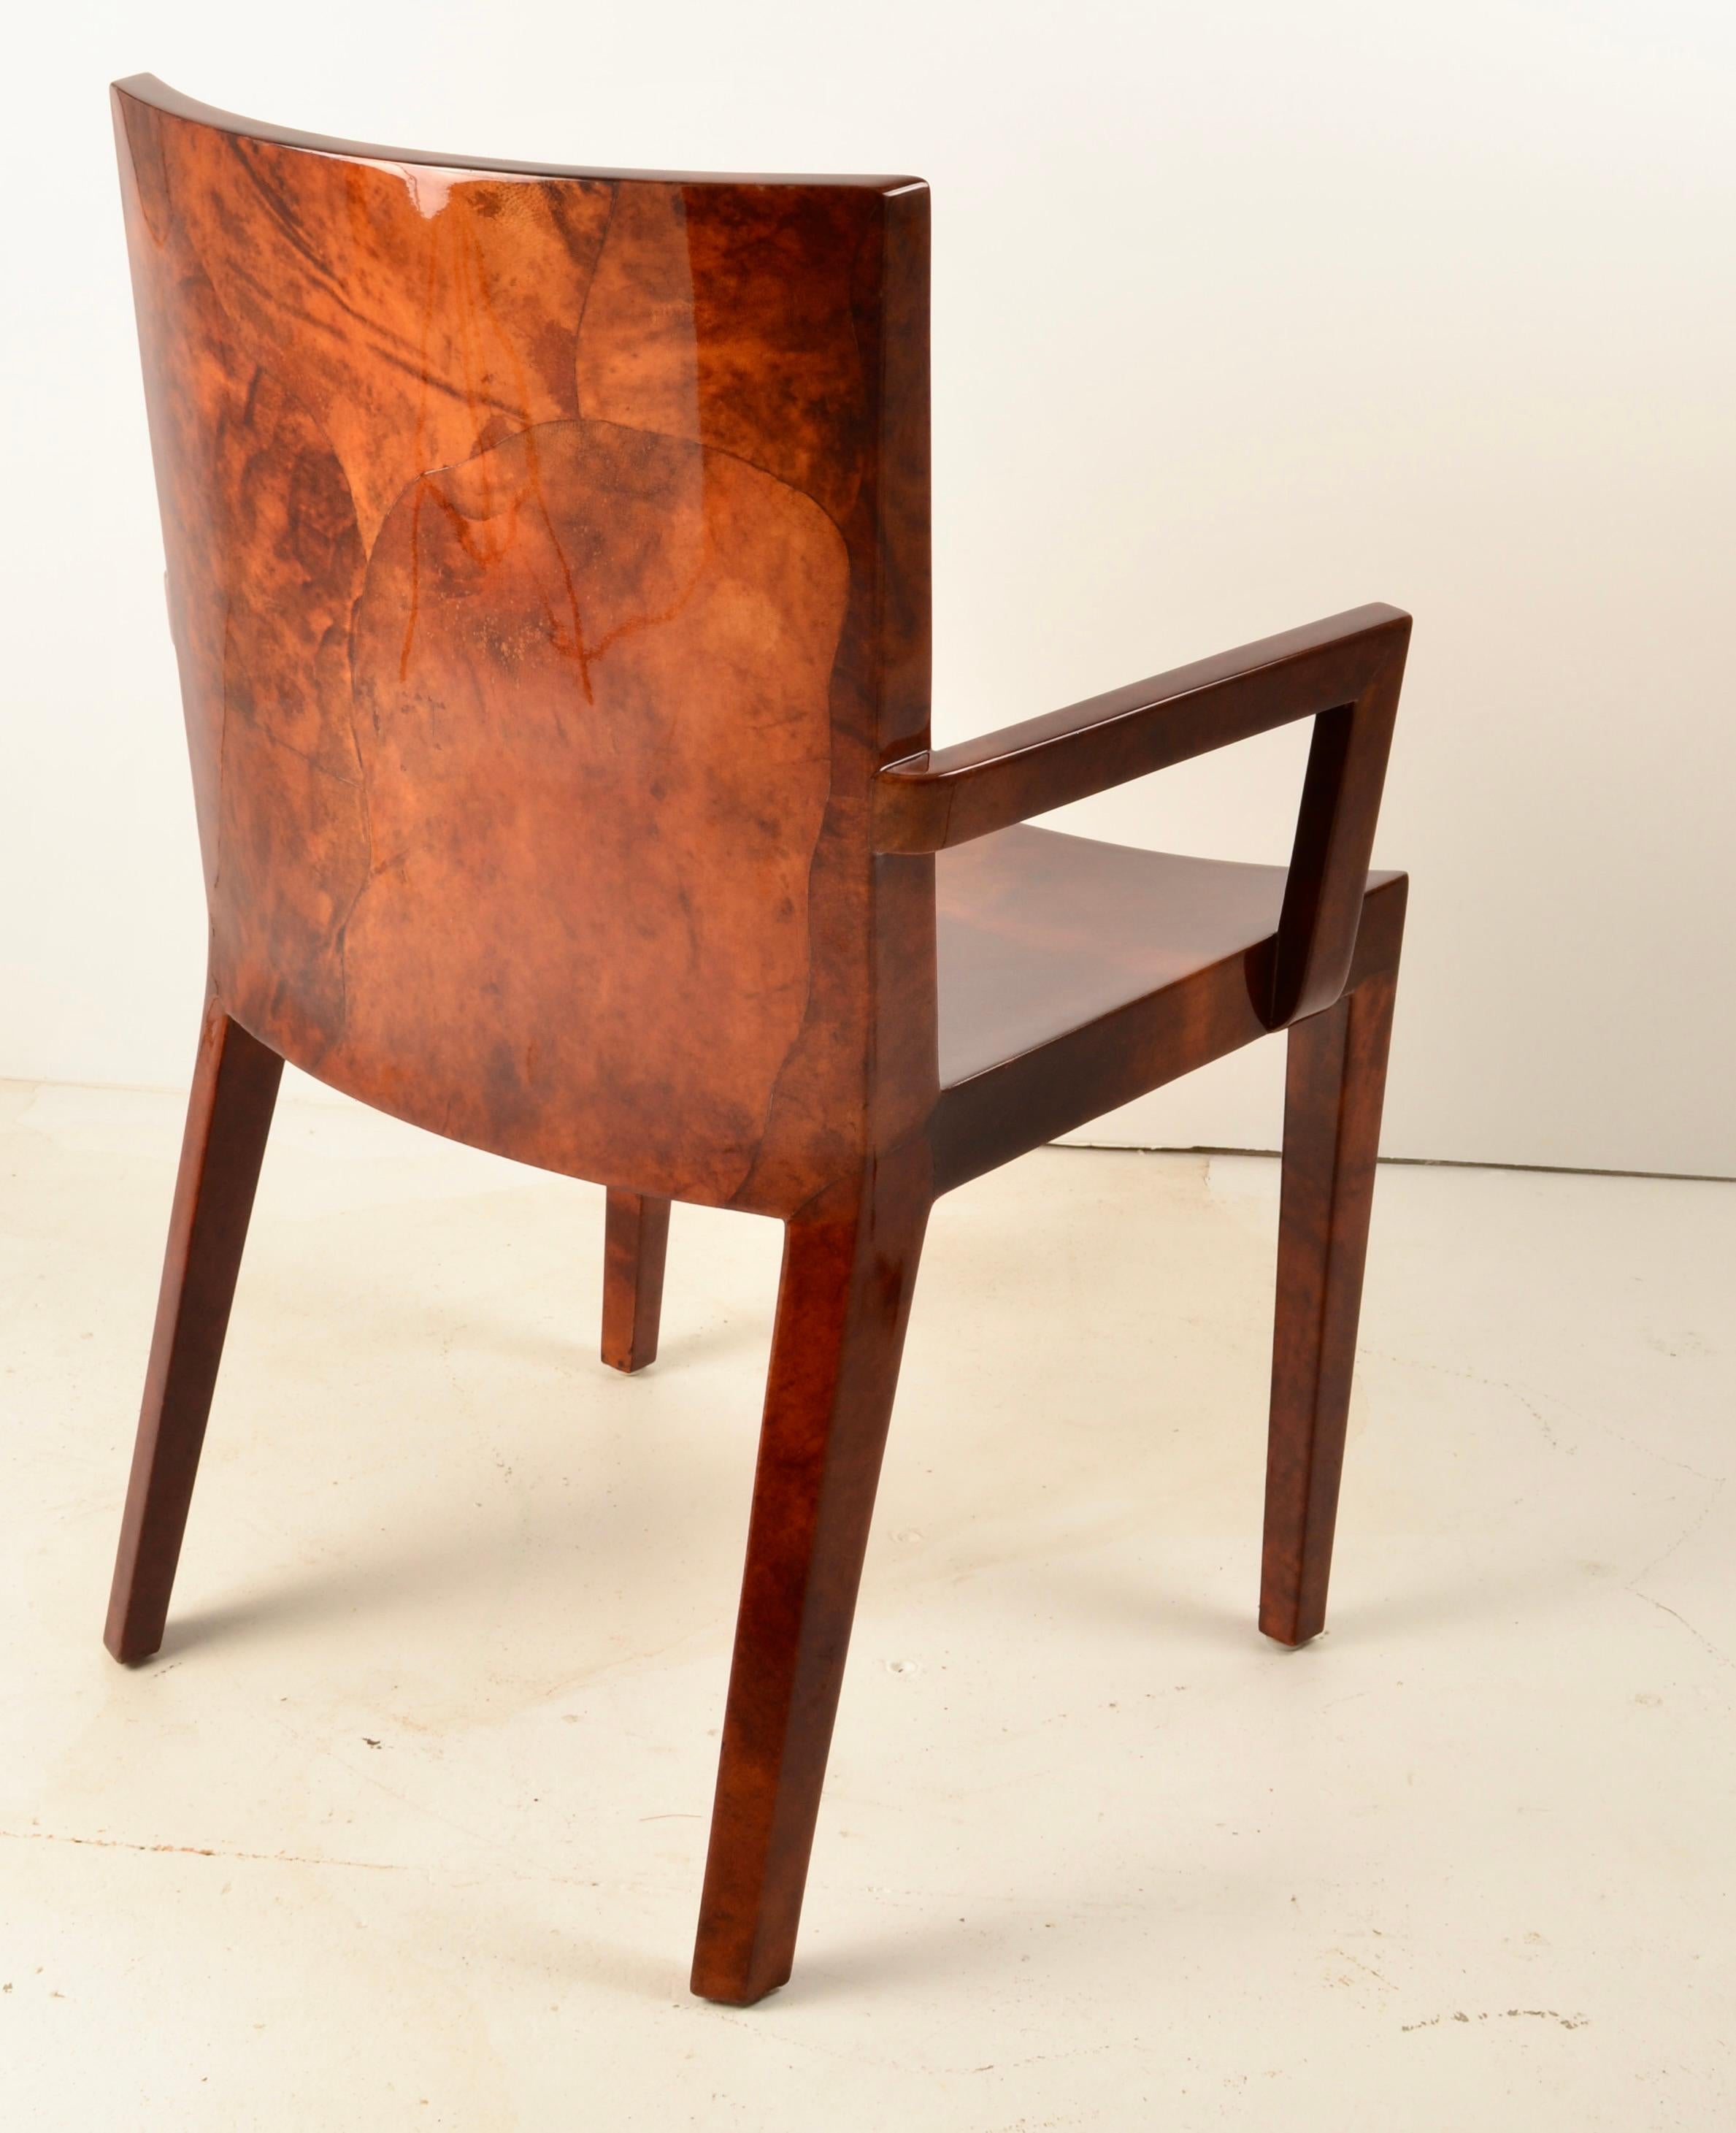 Karl Springer JMF Arm Chair in Lacquered Goat Skin In Good Condition For Sale In Norwalk, CT